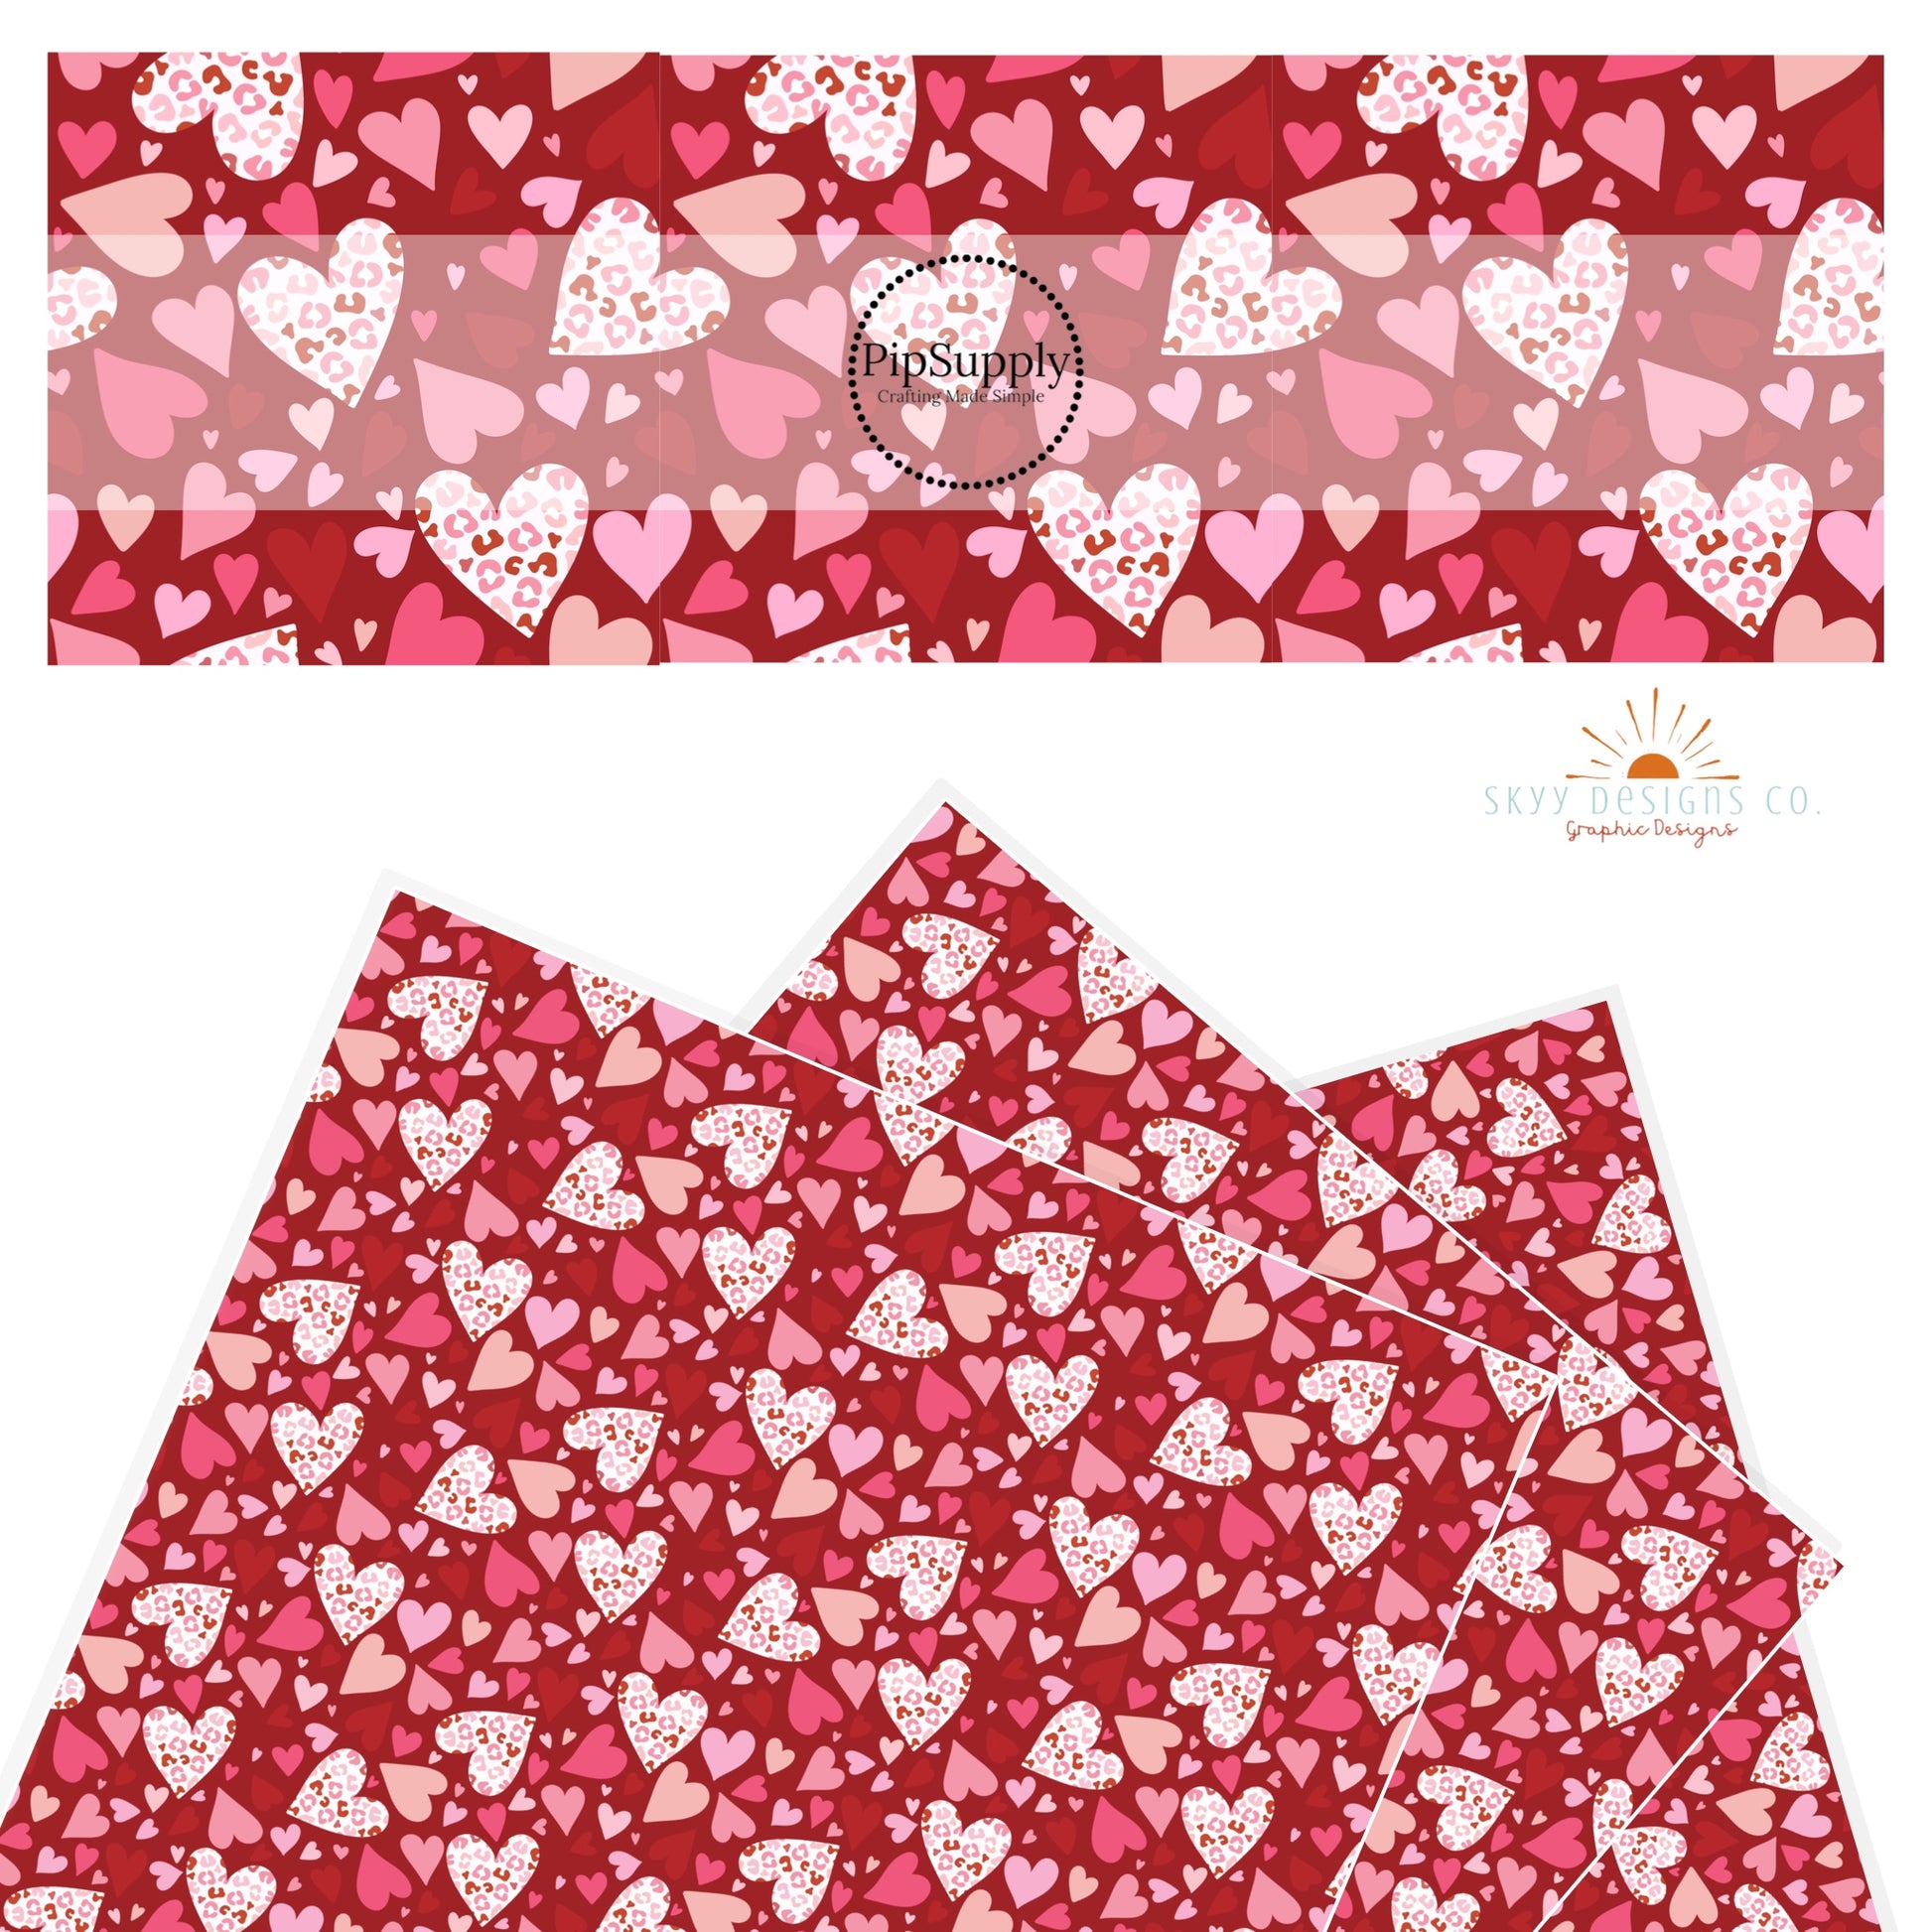 Big leopard print hearts with tiny hearts on red faux leather sheets